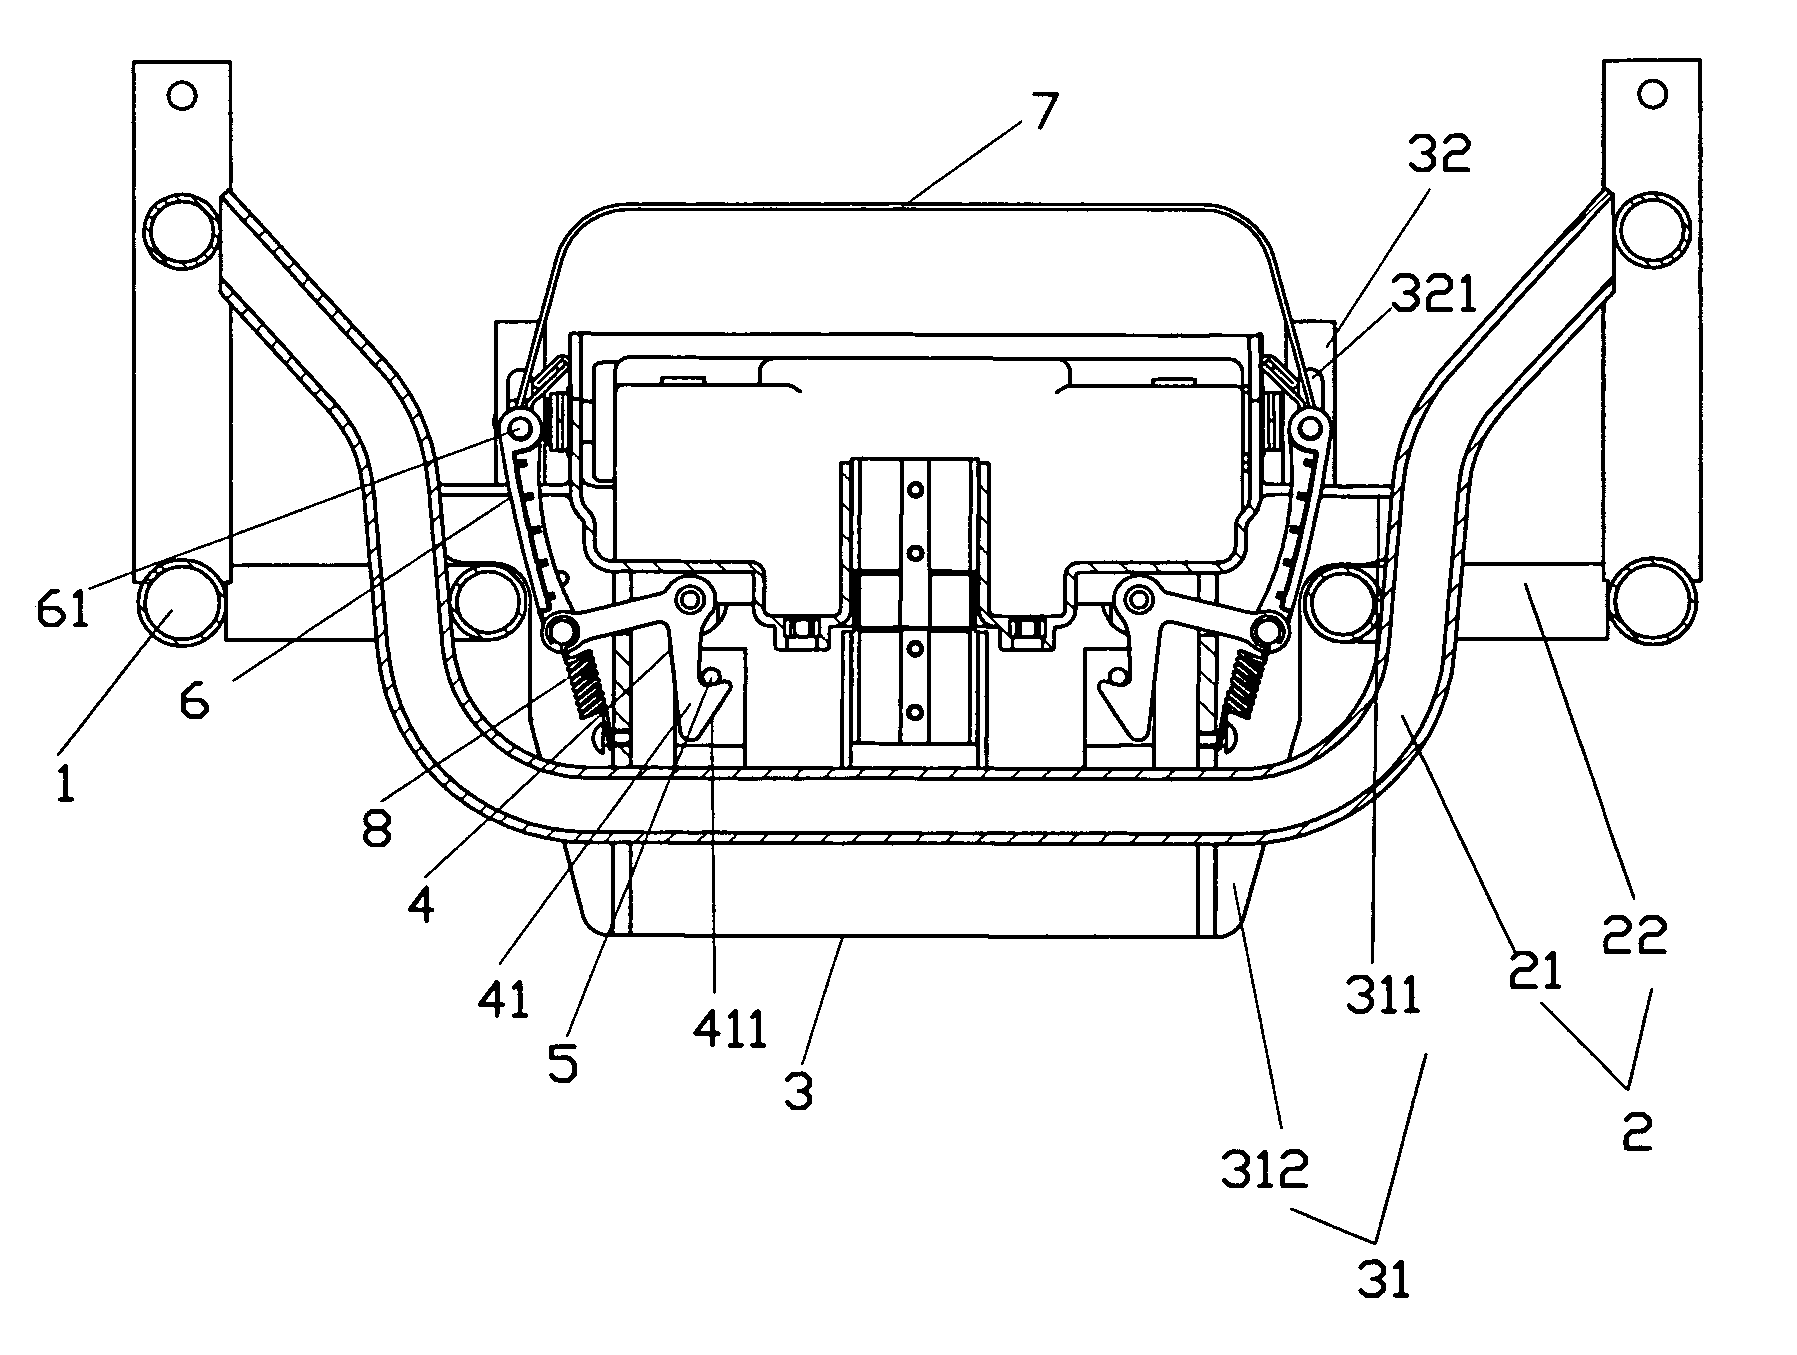 Battery quick-release structure for an electric mobility scooter